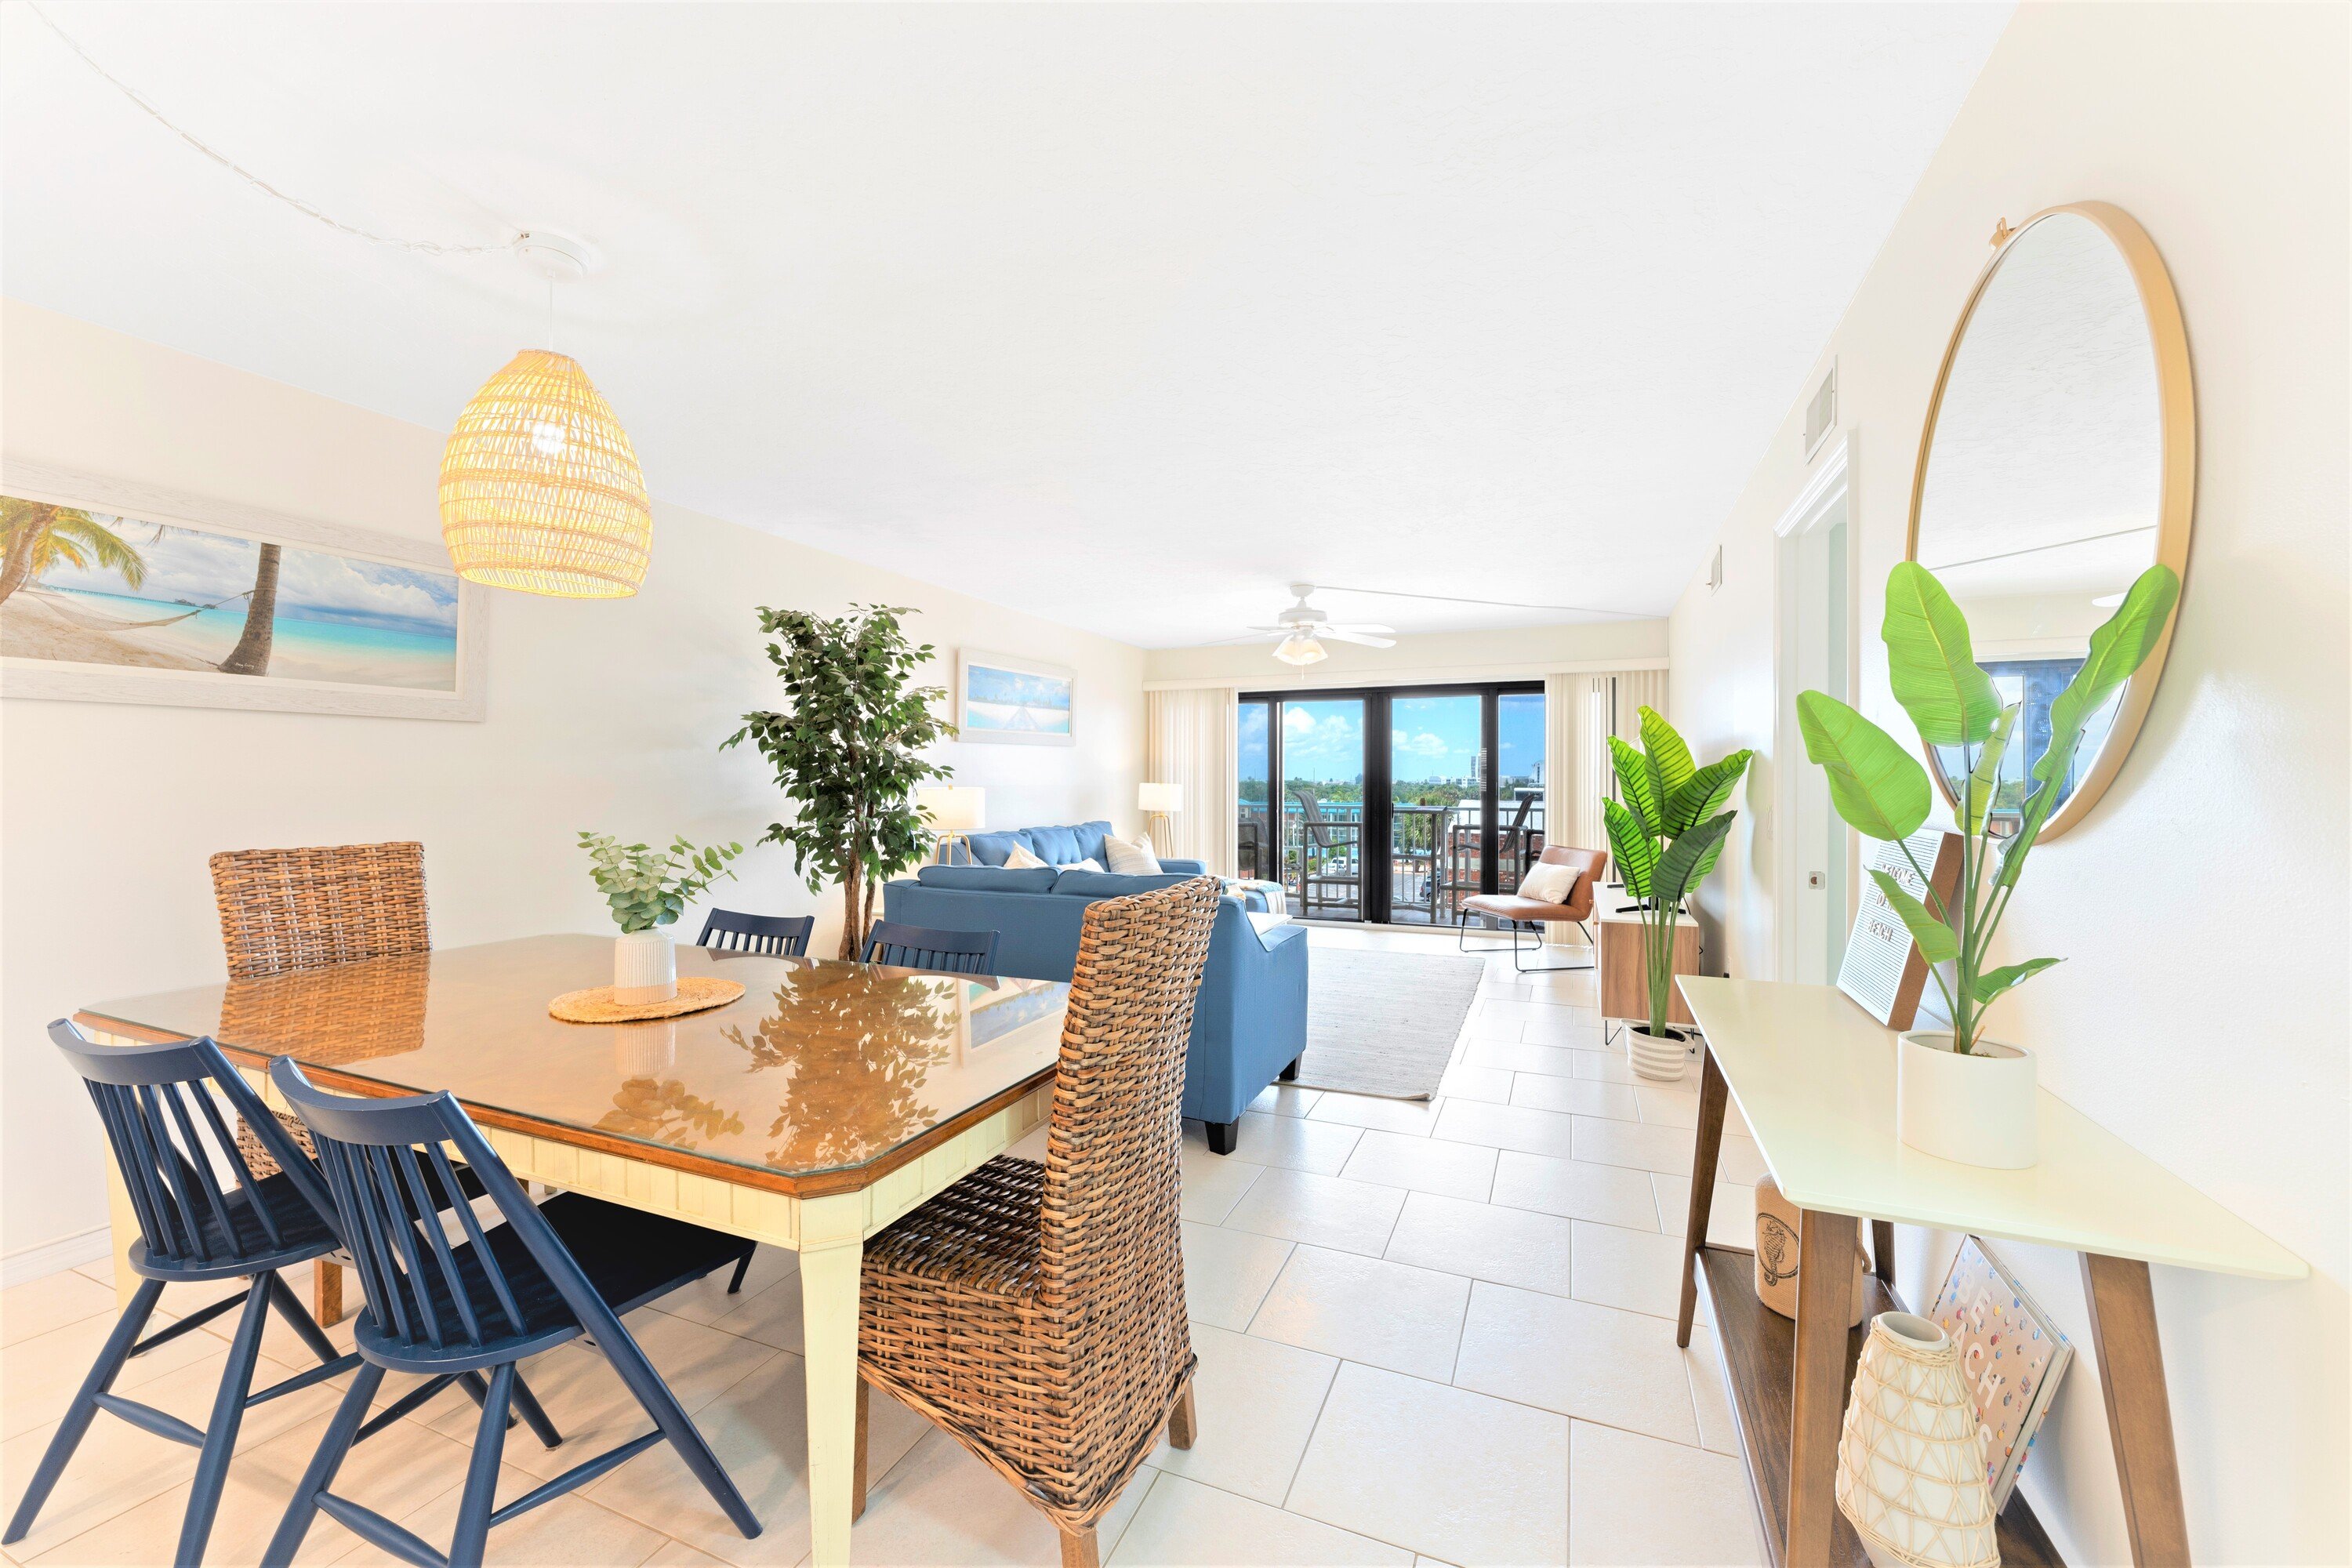 Welcome to Sandcastles 402! This spacious open concept living & dining room walks out onto your private balcony